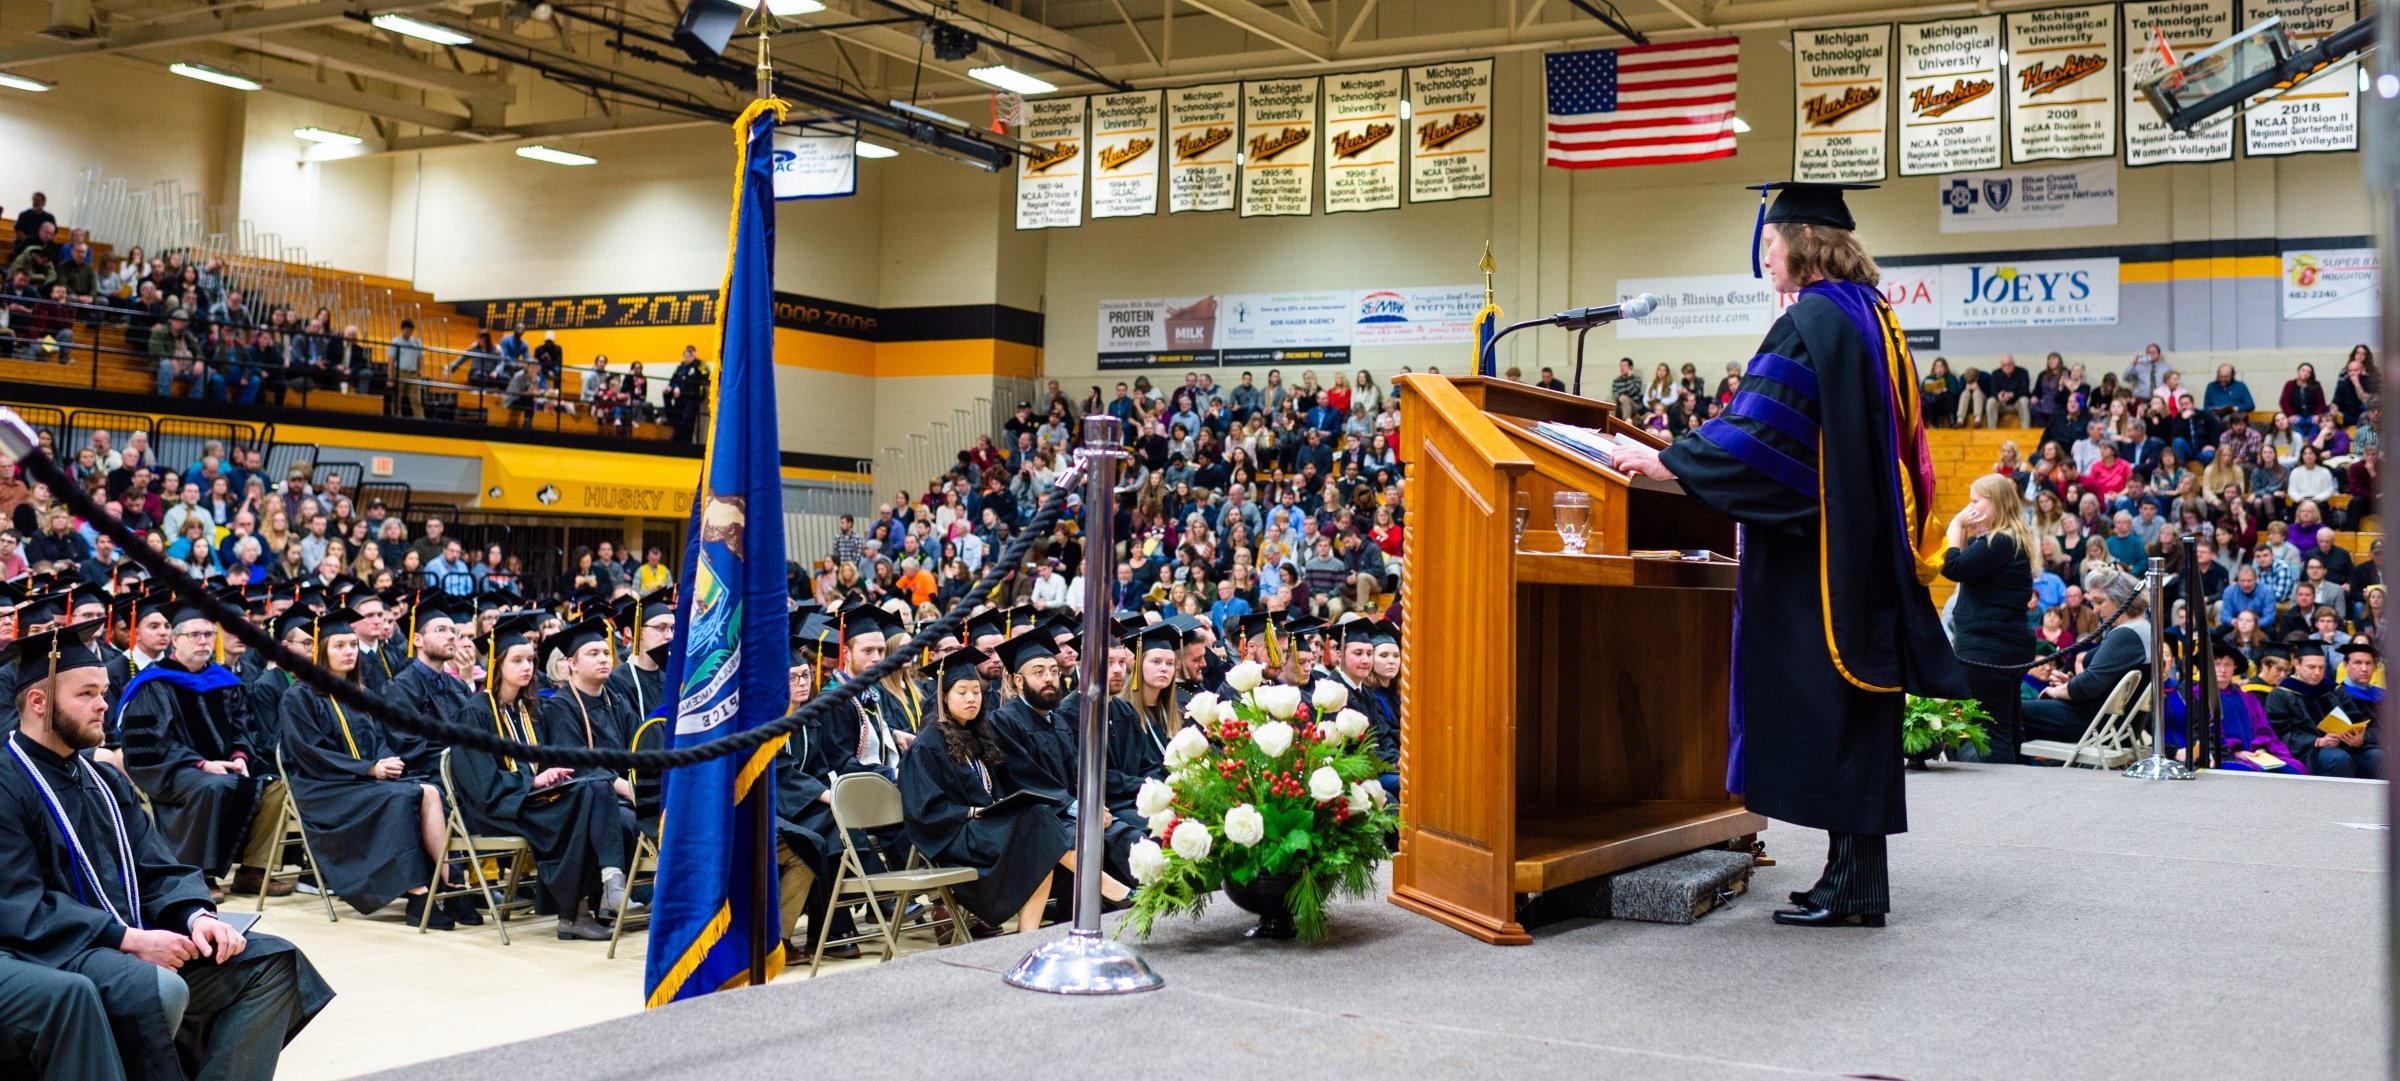 Midyear Commencement with student speaker at the podium